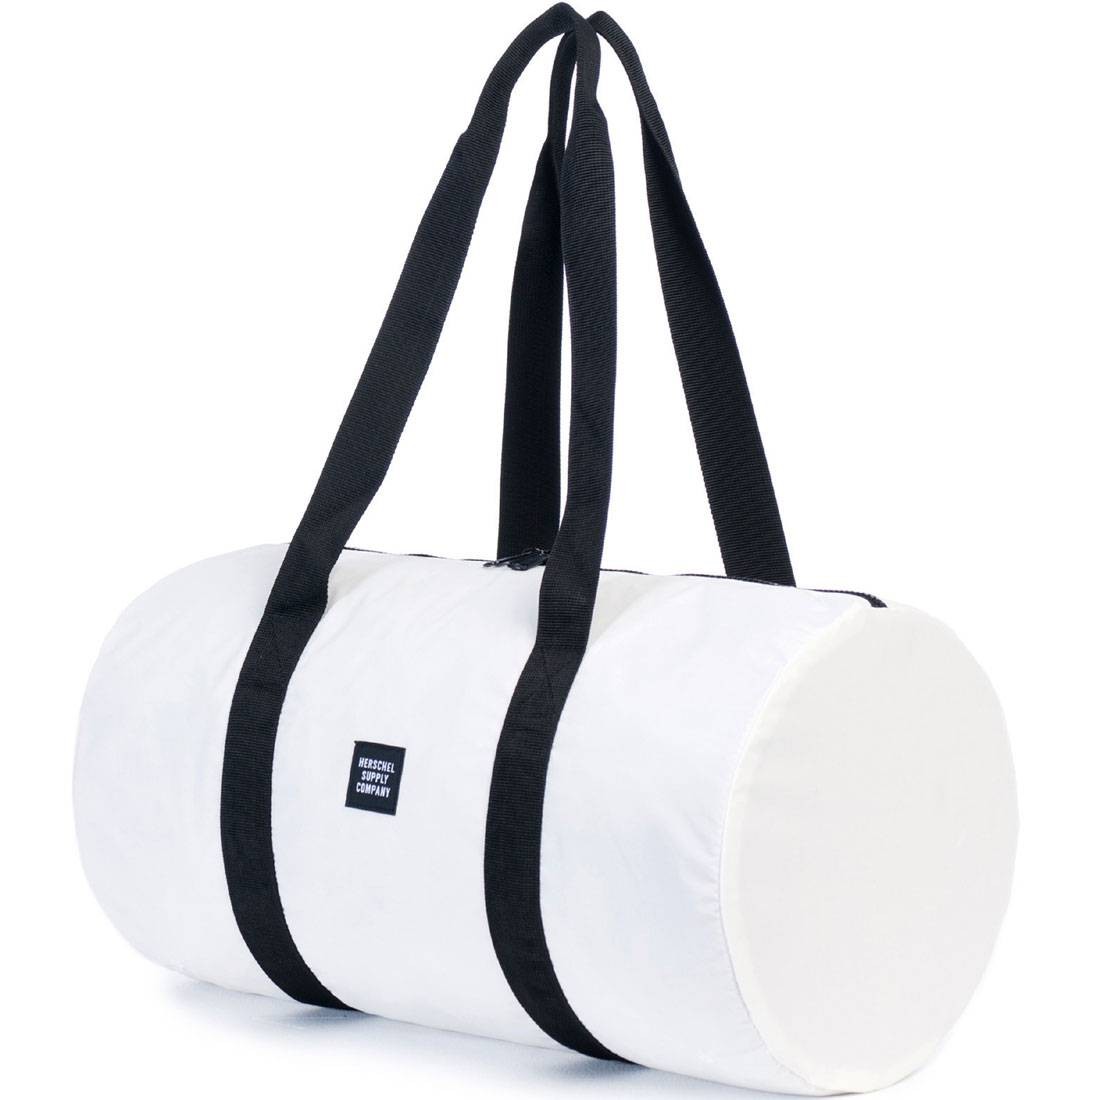 Herschel Supply Co. Packable Mlb National League Tote Bag, $25